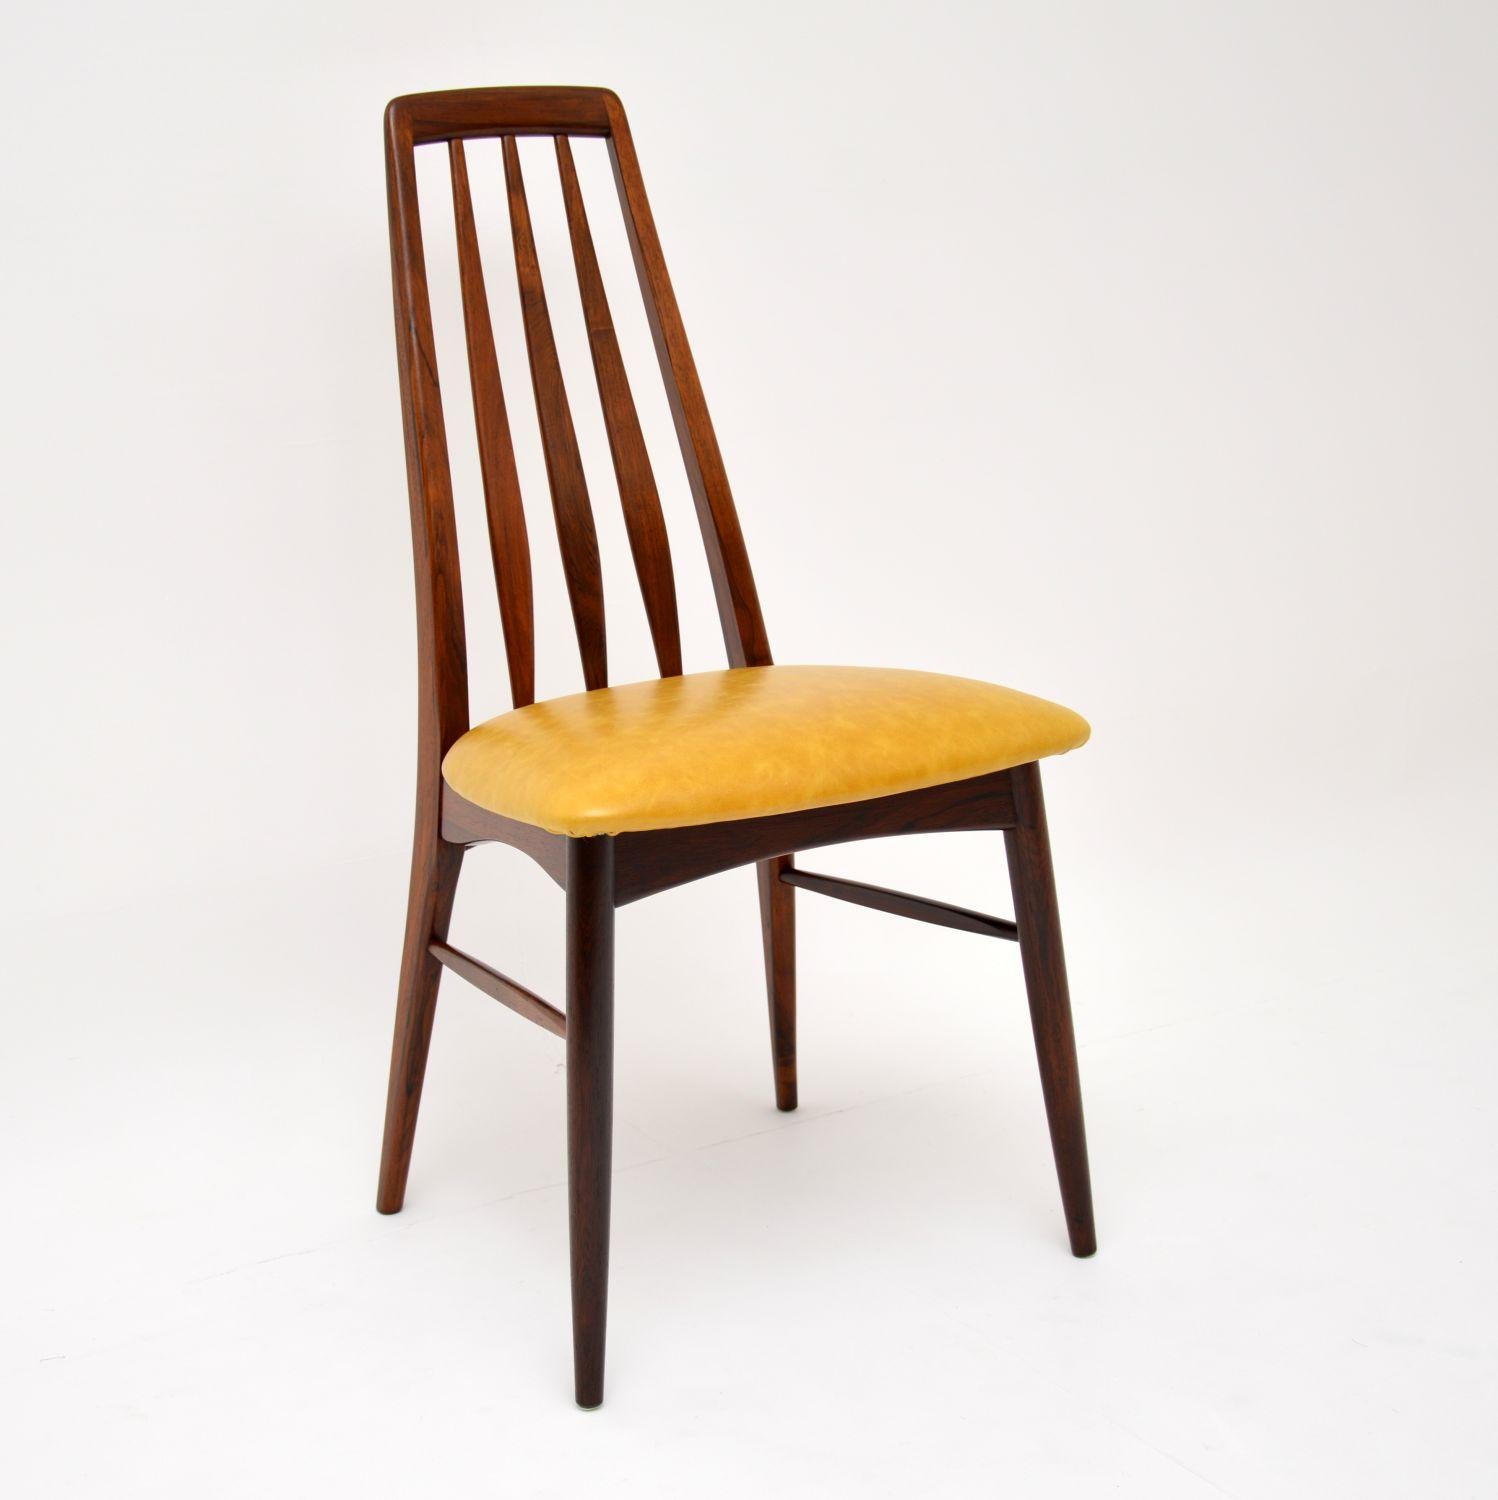 A stunning set of six Danish “Eva” dining chairs, these were designed by Niels Koefoed. They date from the 1960s and were made by Koefoeds Hornslet.

We have had these fully restored and they are in absolutely immaculate condition. The frames have